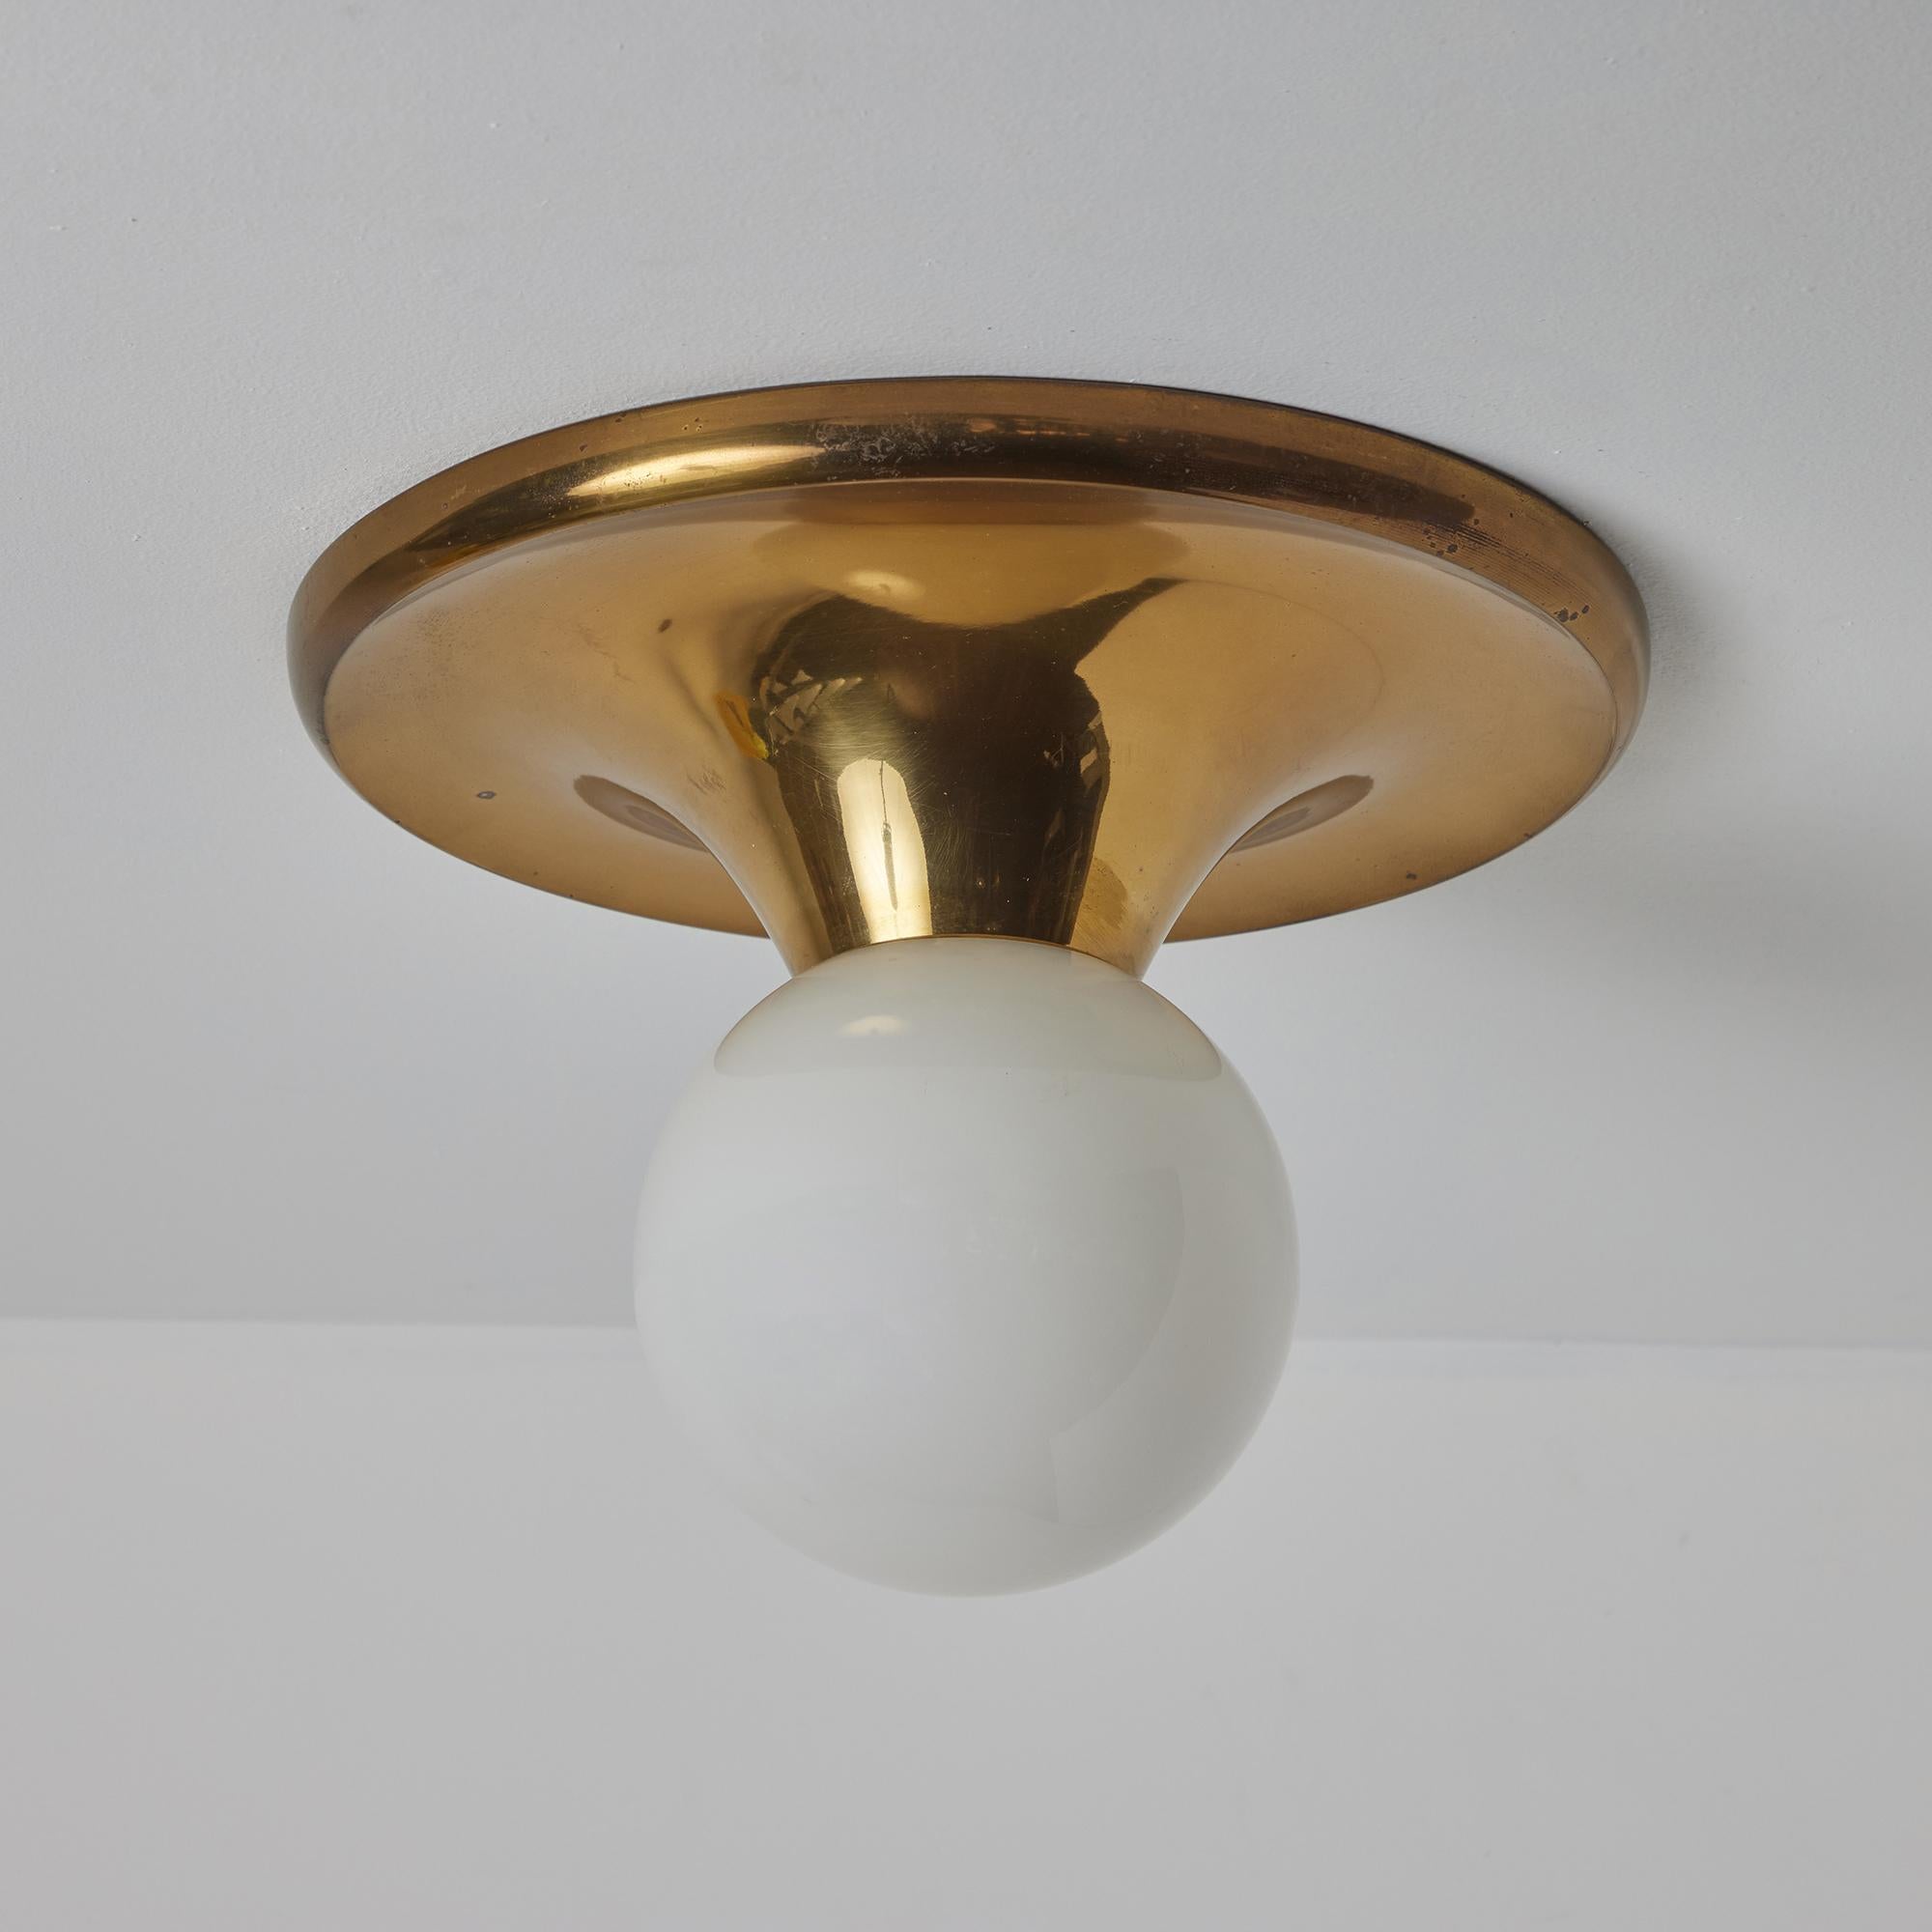 Large 1960s Achille Castiglioni & Pier Giacomo 'Light Ball' Wall or Ceiling Lamp In Good Condition For Sale In Glendale, CA